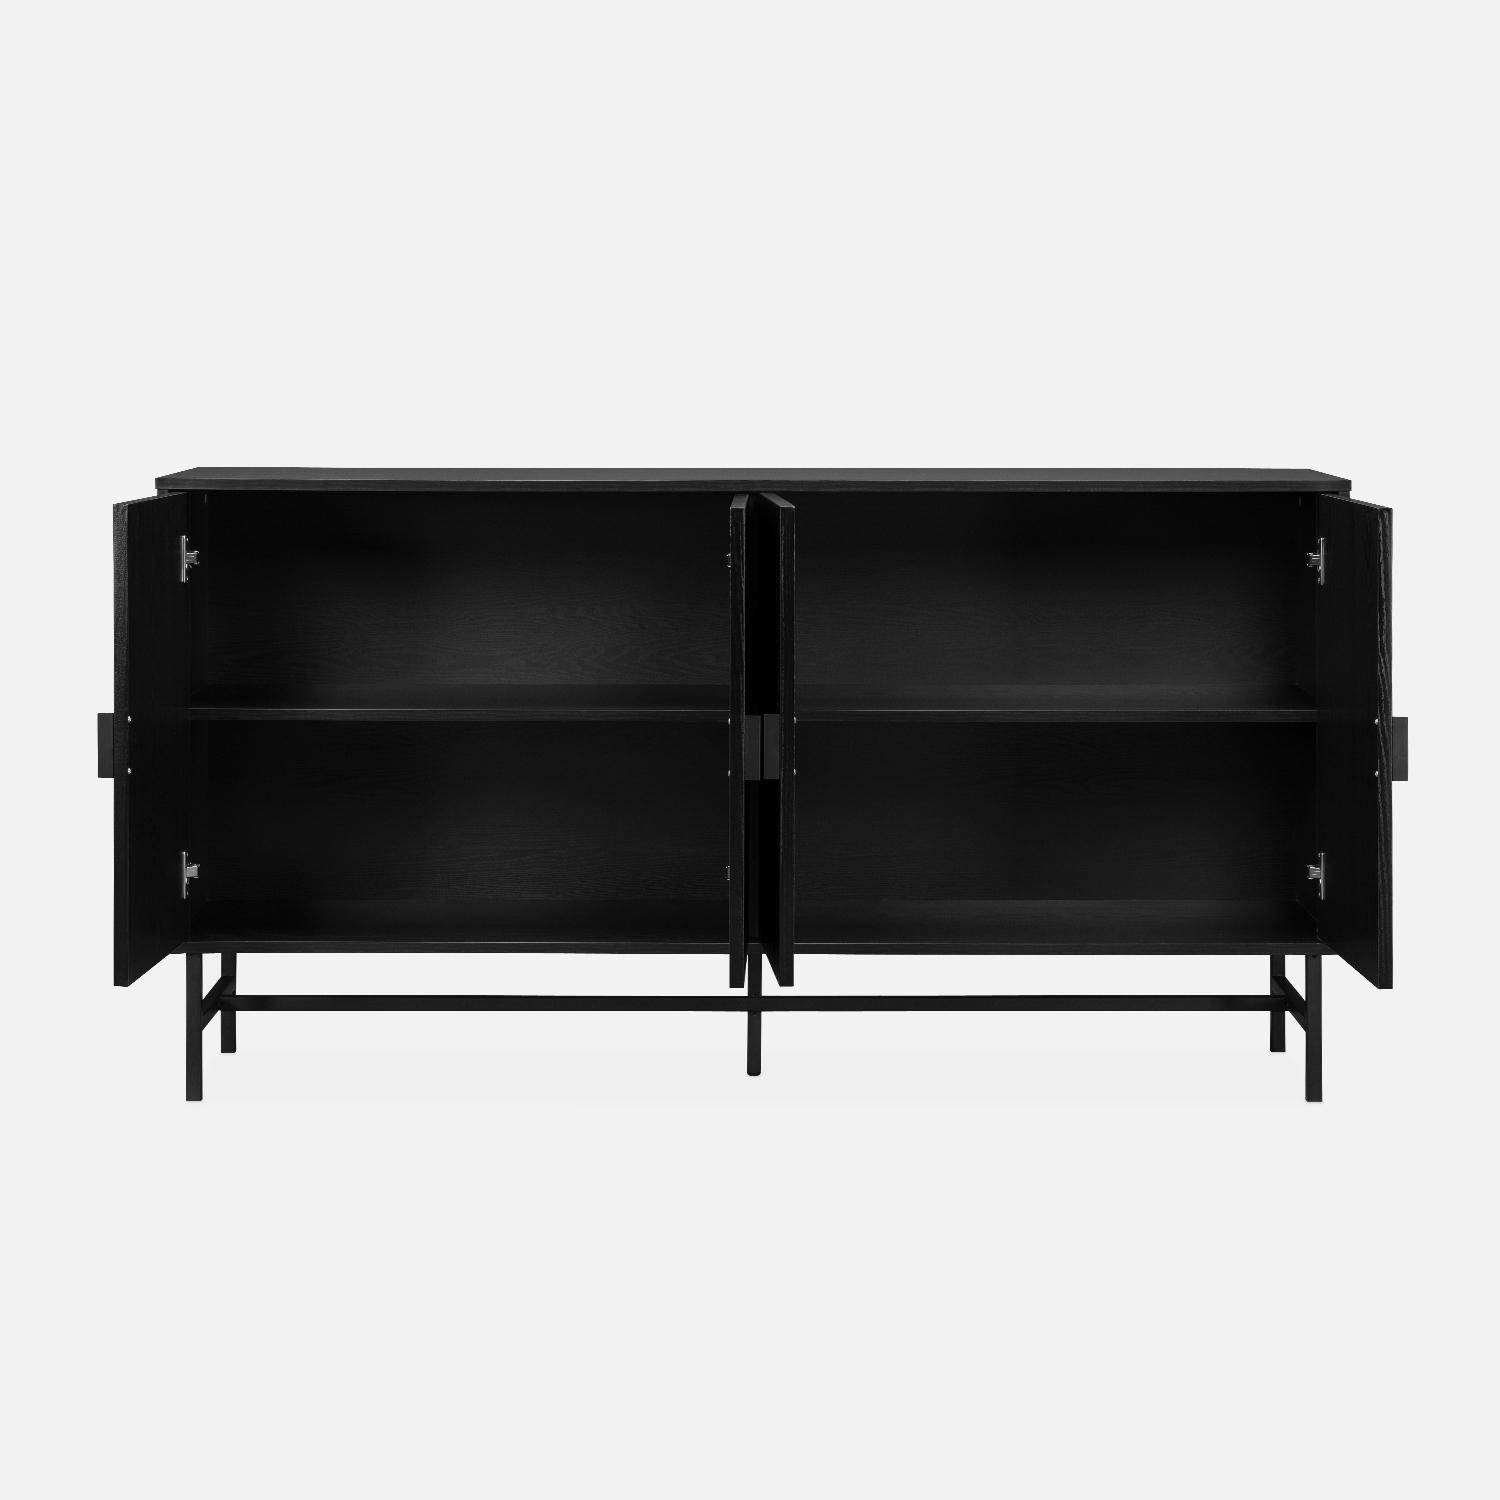 Sideboard cabinet with two doors and one shelf, ridged effect, industrial style, 157.5x39x83cm - Bazalt - Black Photo6